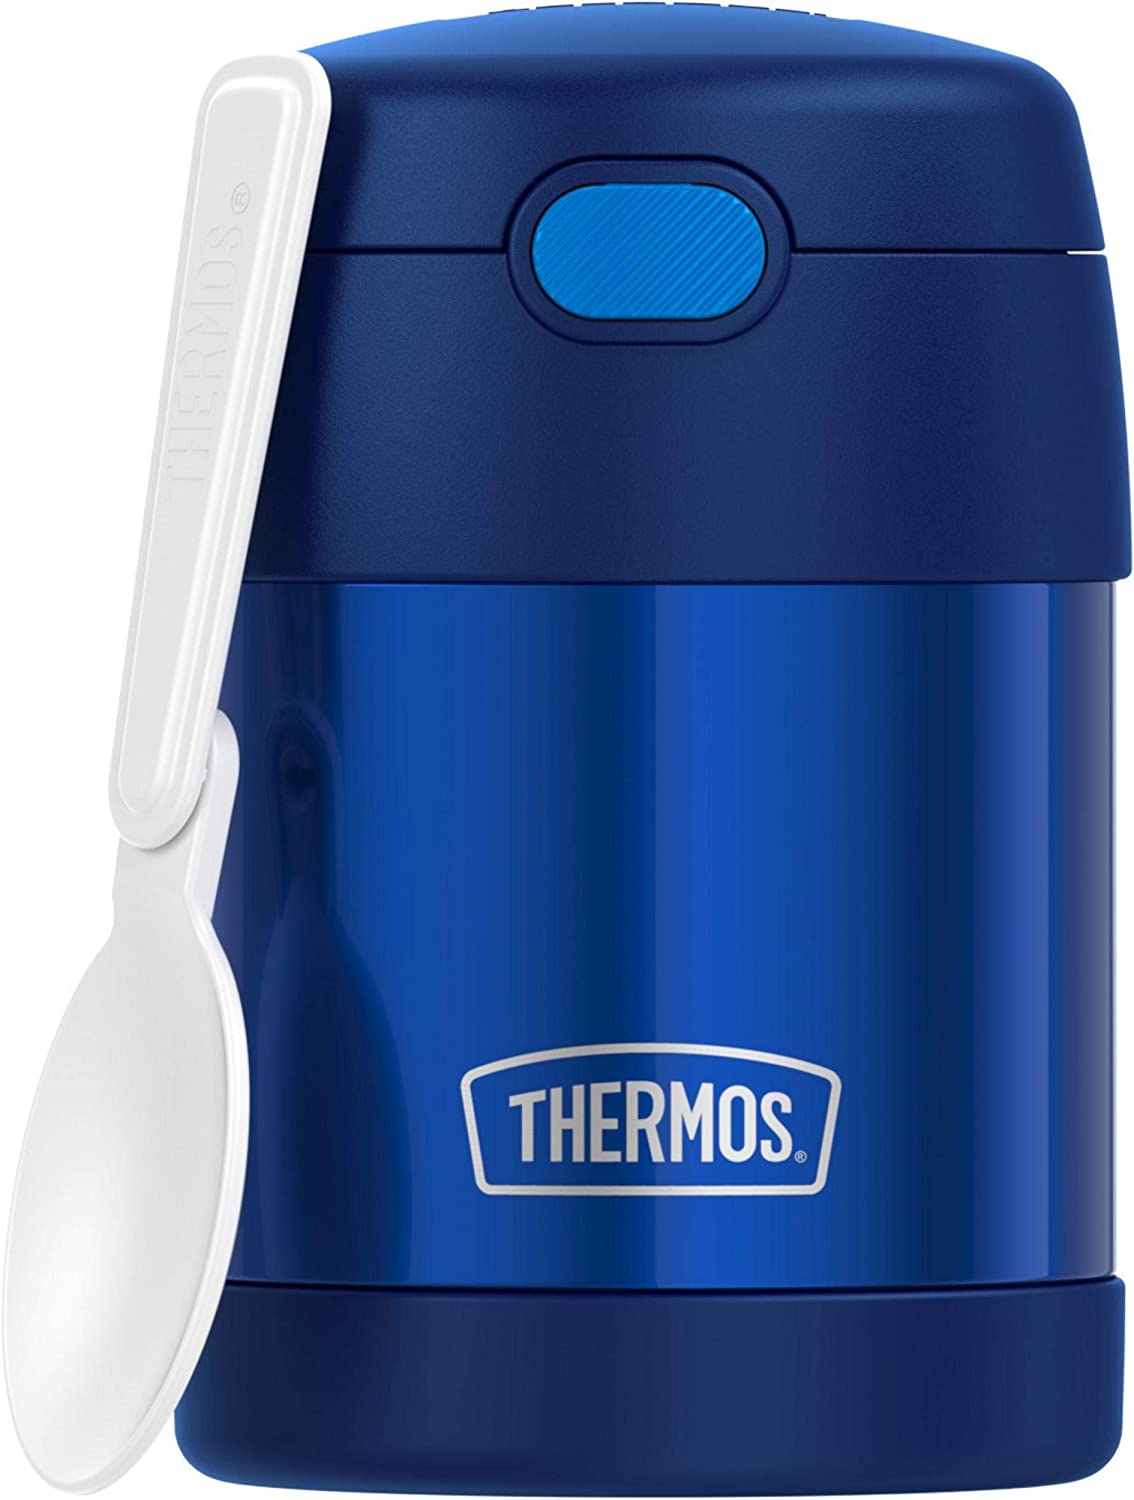 THERMOS FUNTAINER 10 Ounce Stainless Steel Vacuum Insulated Kids Food Jar with Folding Spoon, Navy Import To Shop ×Product